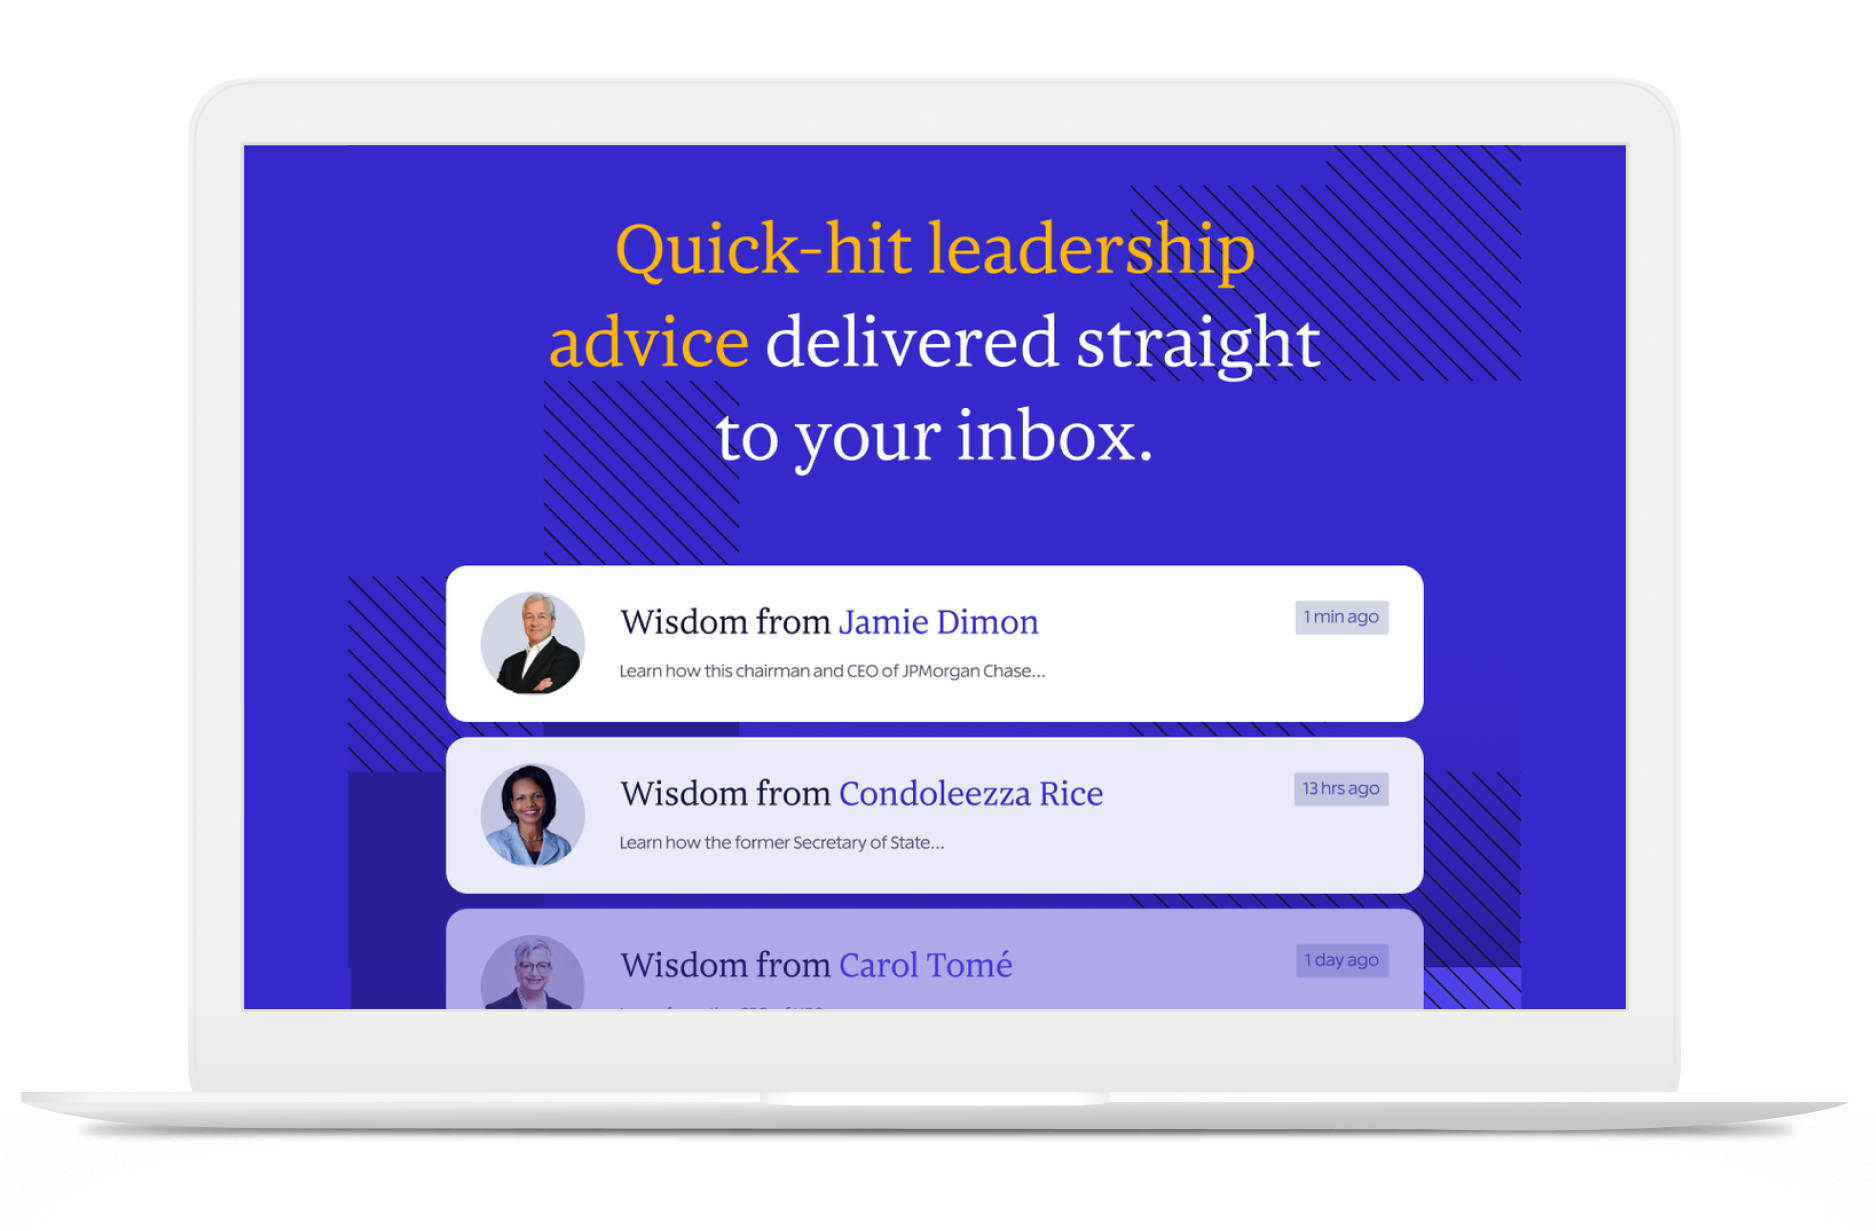 Get 2 minutes of daily leadership wisdom directly to your inbox.